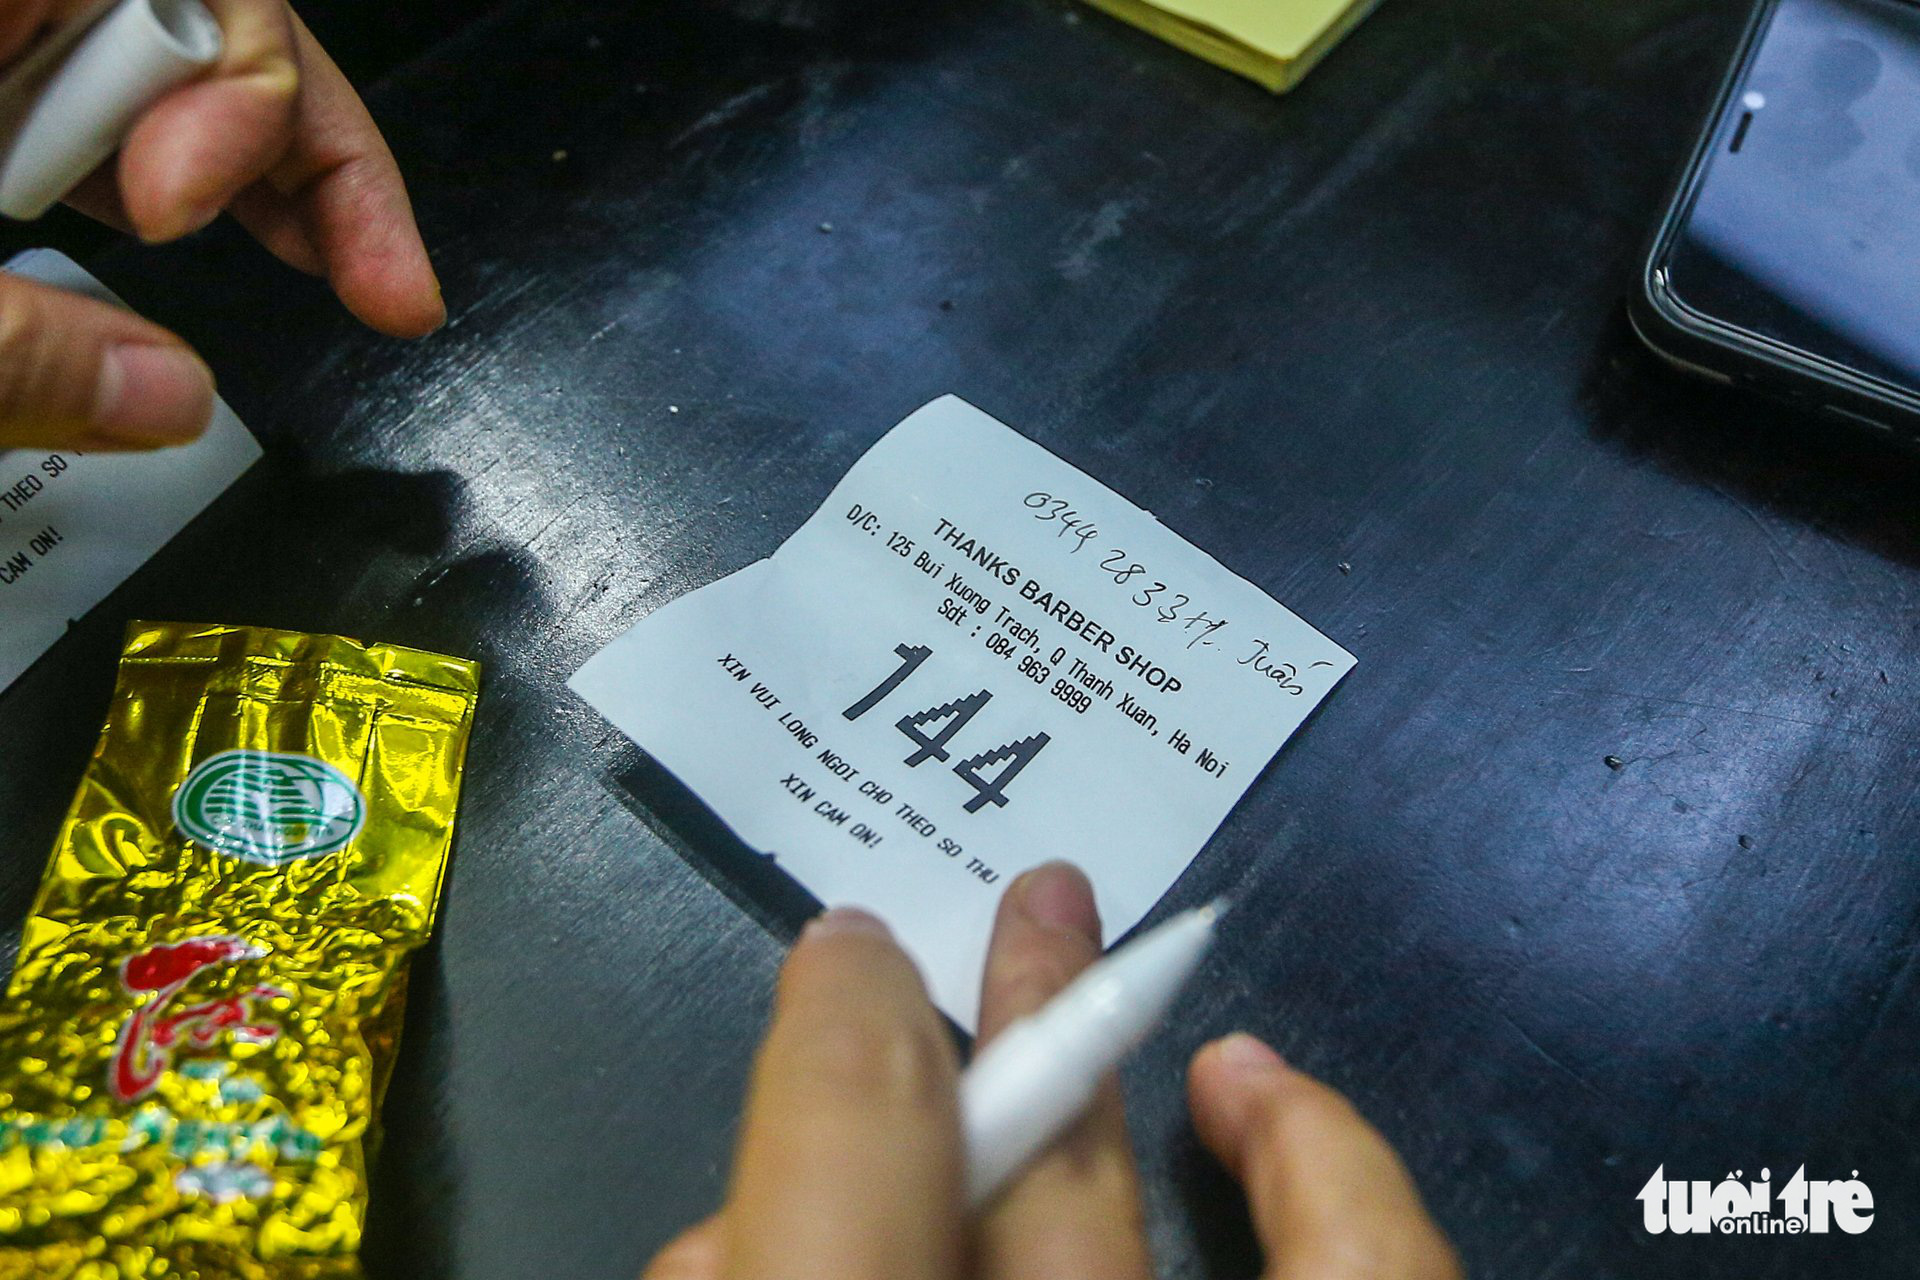 A queue number ticket at a barbershop on Bui Xuong Trach Street, Thanh Xuan District, Hanoi, July 12, 2021. Photo: Ha Quan / Tuoi Tre